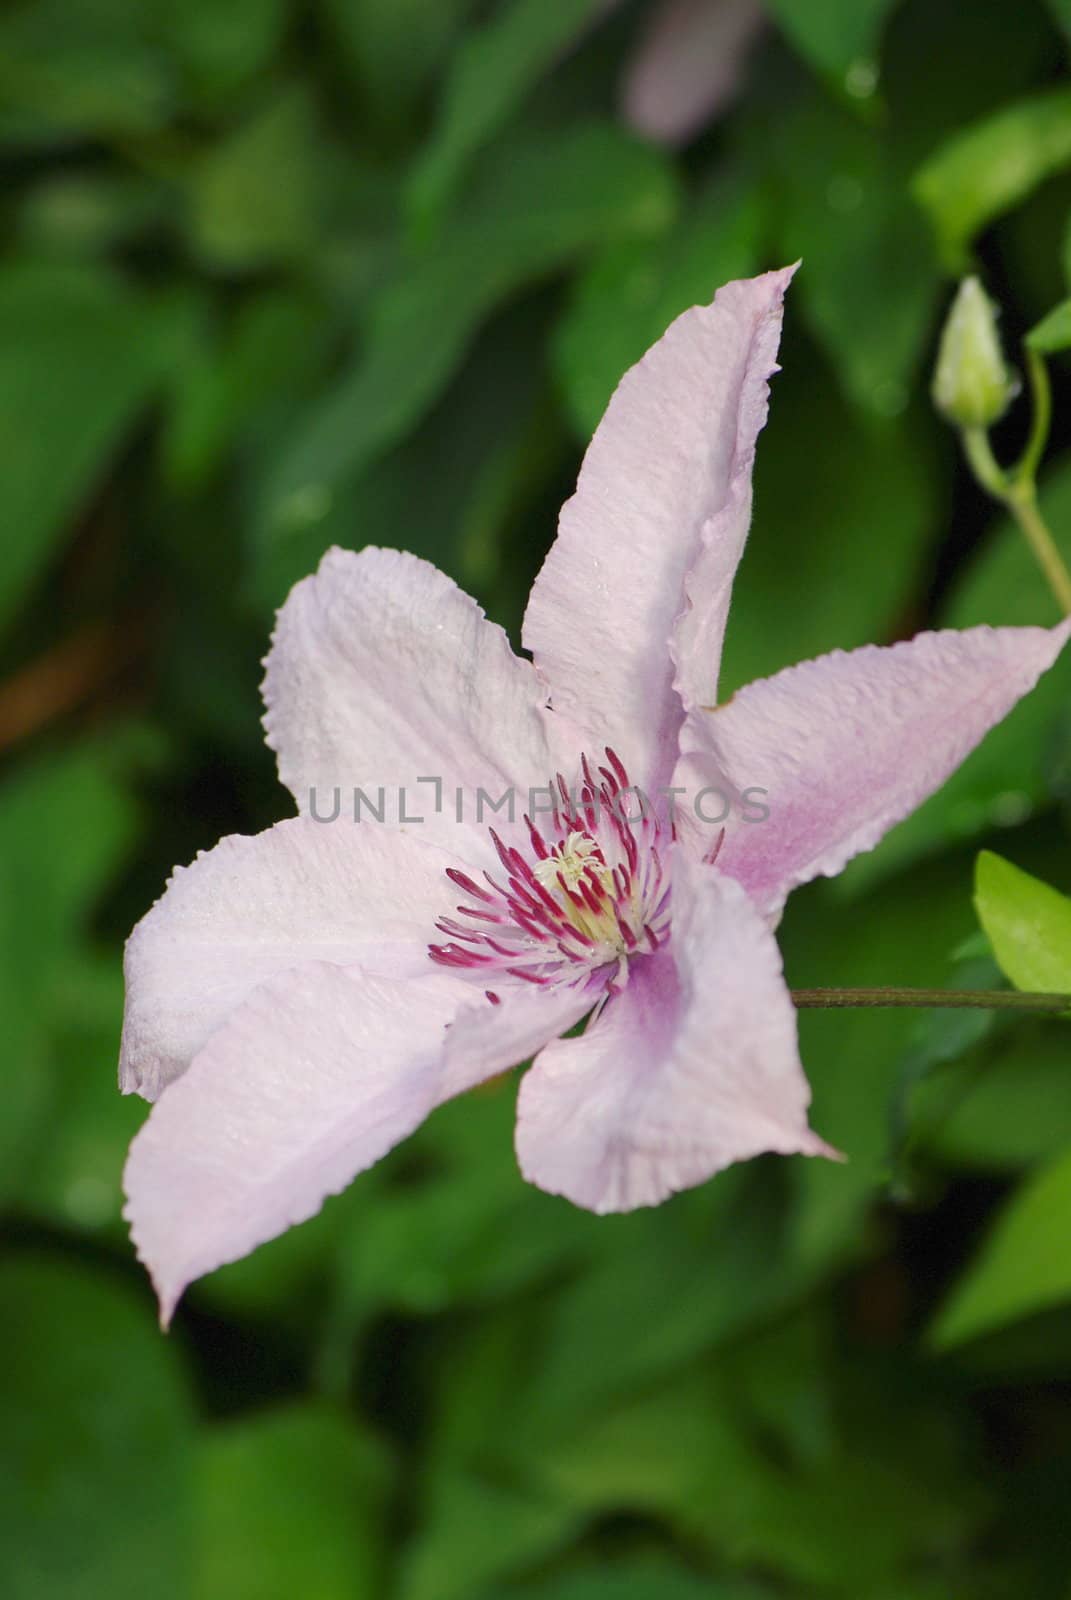 Pink-and-white clematis flower in bloom with leaves close-up